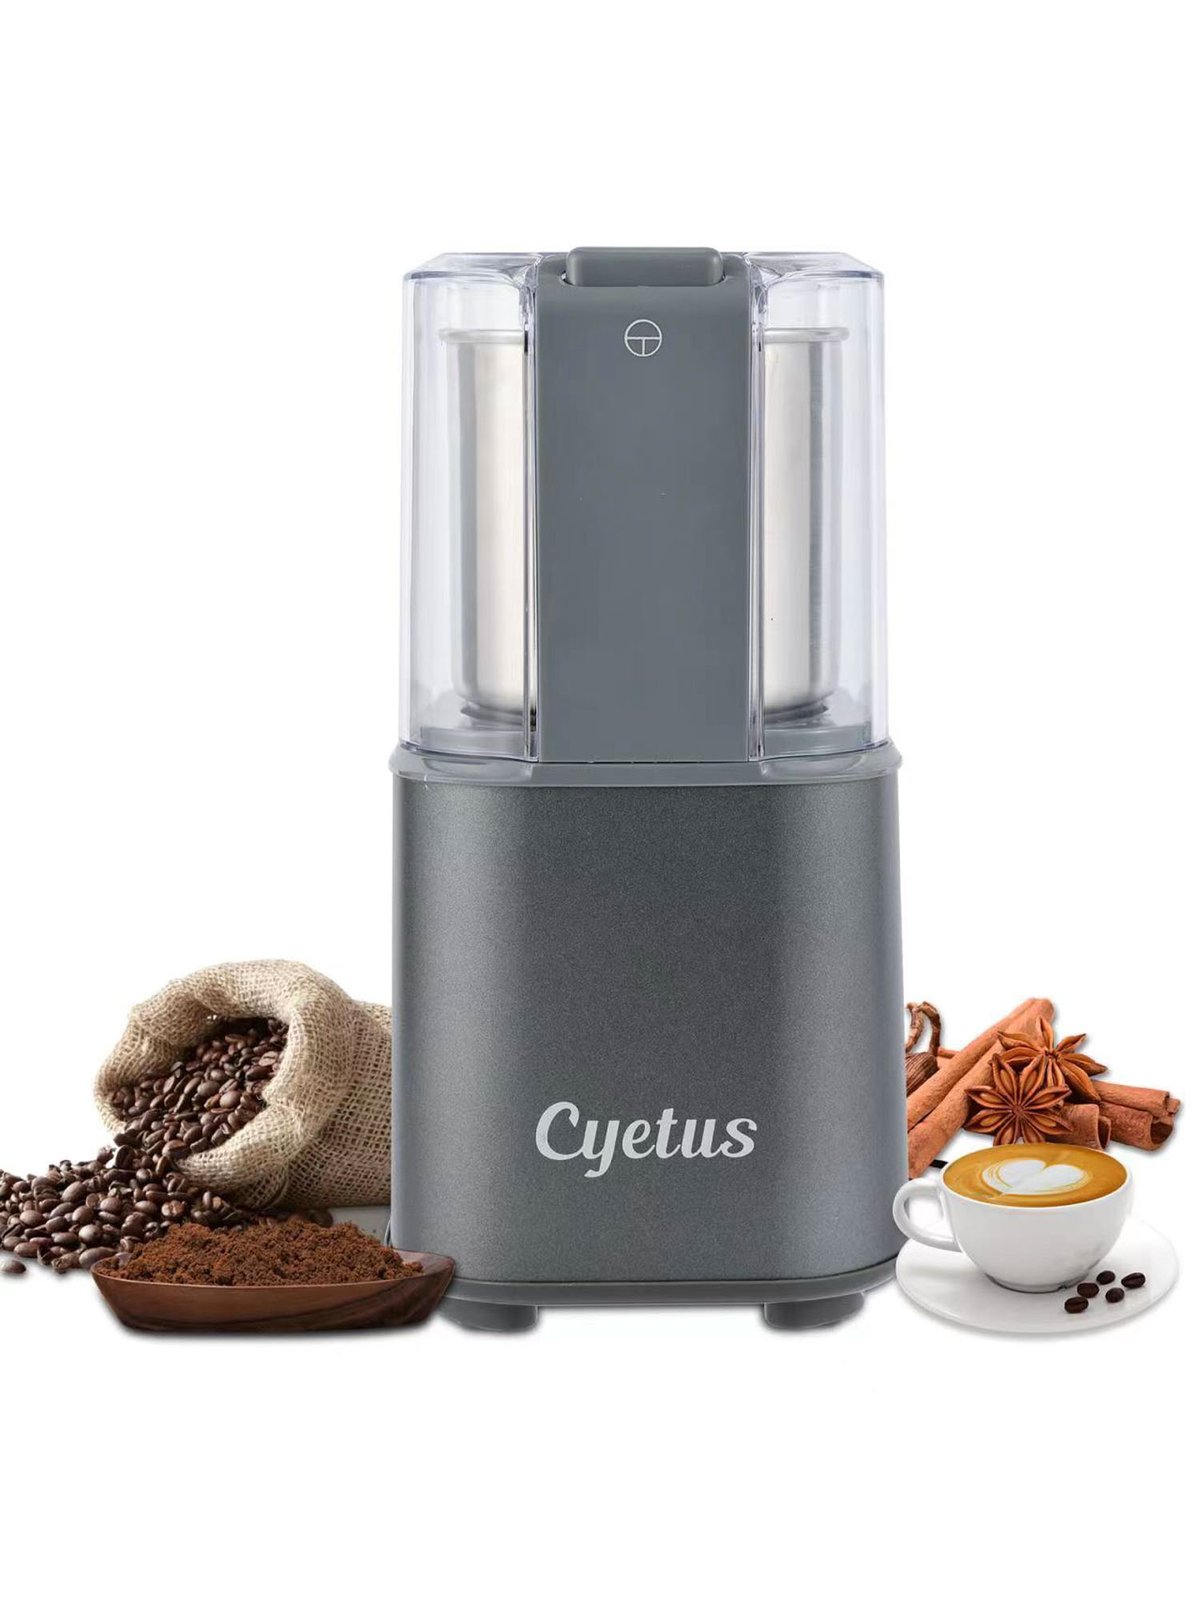 https://images.verishop.com/cyetus-black-espresso-machine-with-milk-steam-frother-wand-electric-coffee-bean-grinder-and-4-in-1-automatic-milk-frother-steamer/M00679283562668-1520699916?auto=format&cs=strip&fit=max&w=1200